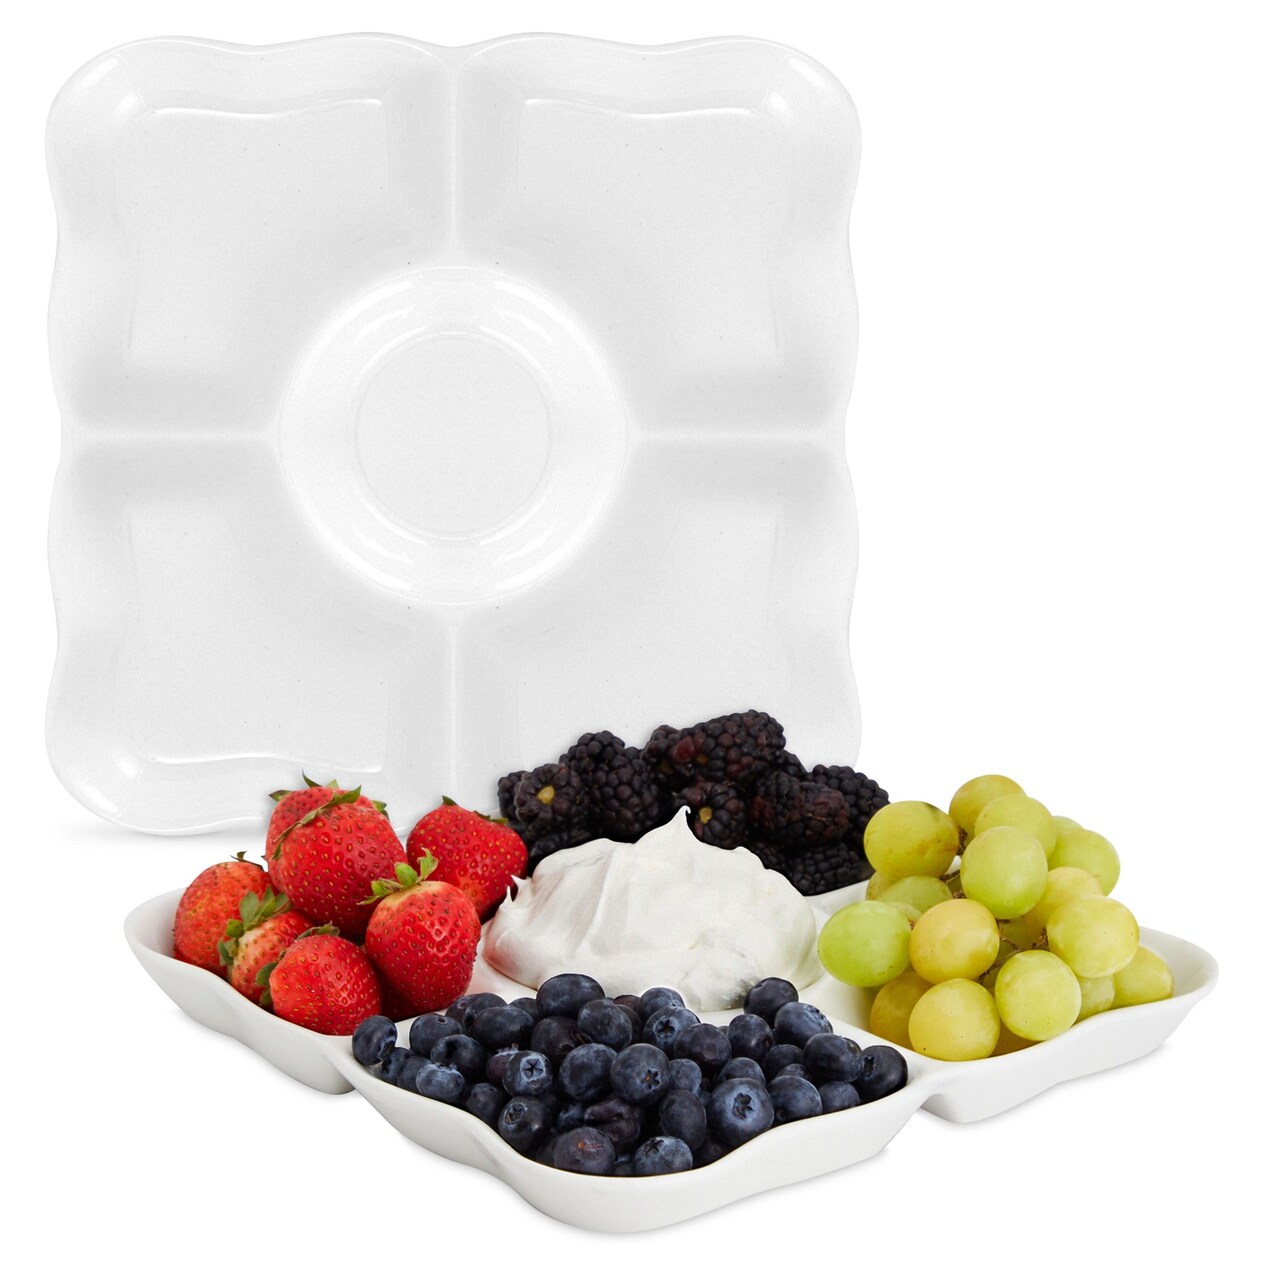 Set of 2 Porcelain Appetizer Trays, 5-Compartment Divided Serving Platters (9.5 x 9.5 x 1 In)